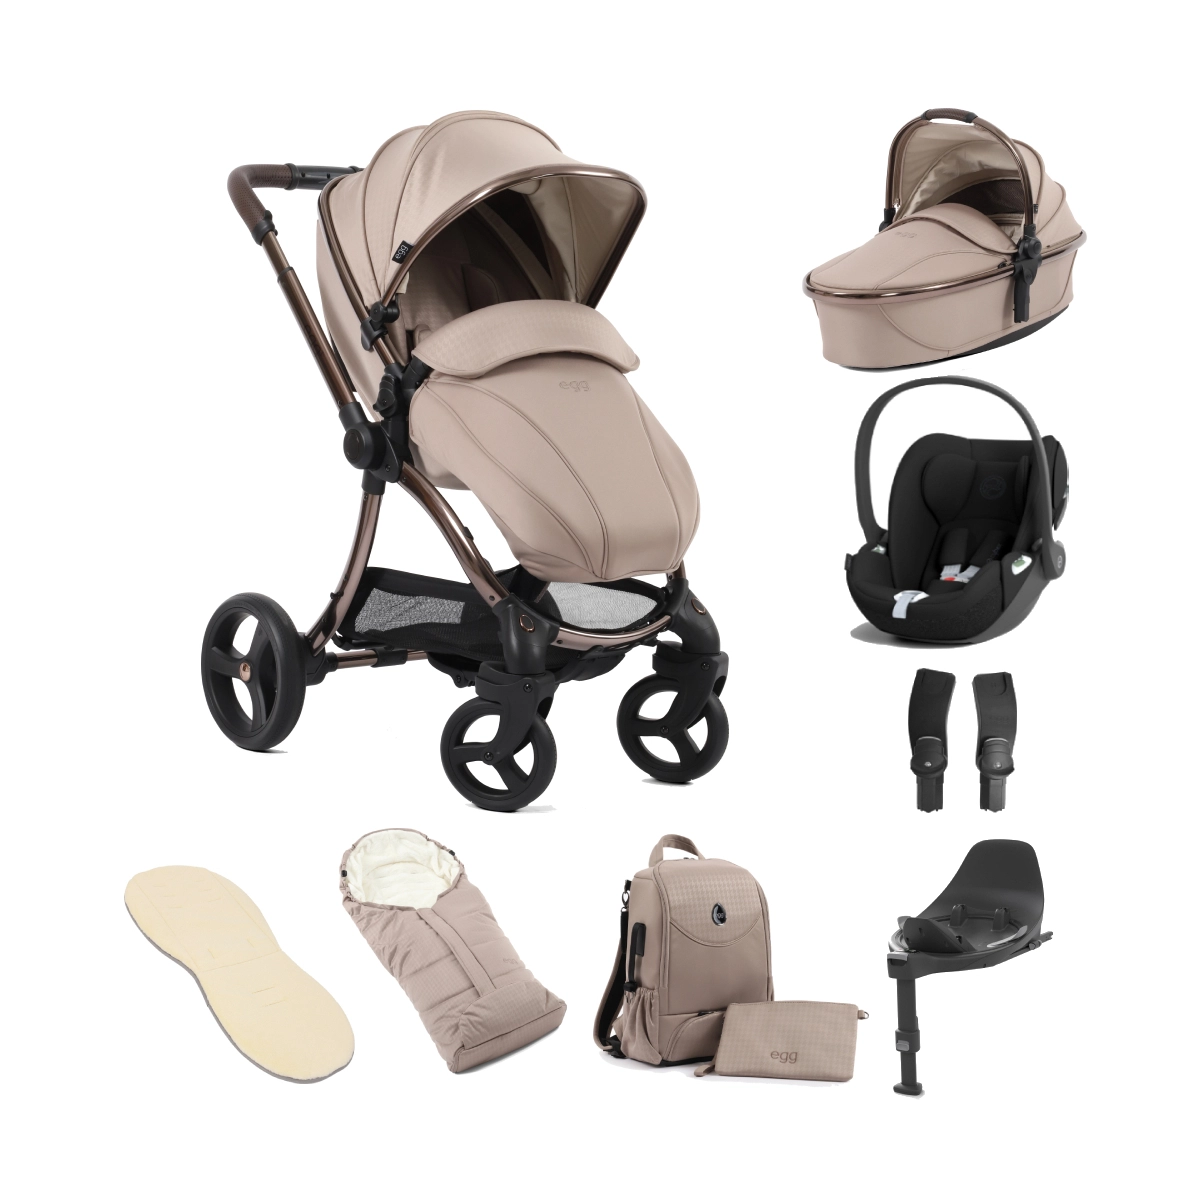 egg® 3 Luxury Special Edition 8 Piece Bundle with Cybex Cloud T Car Seat